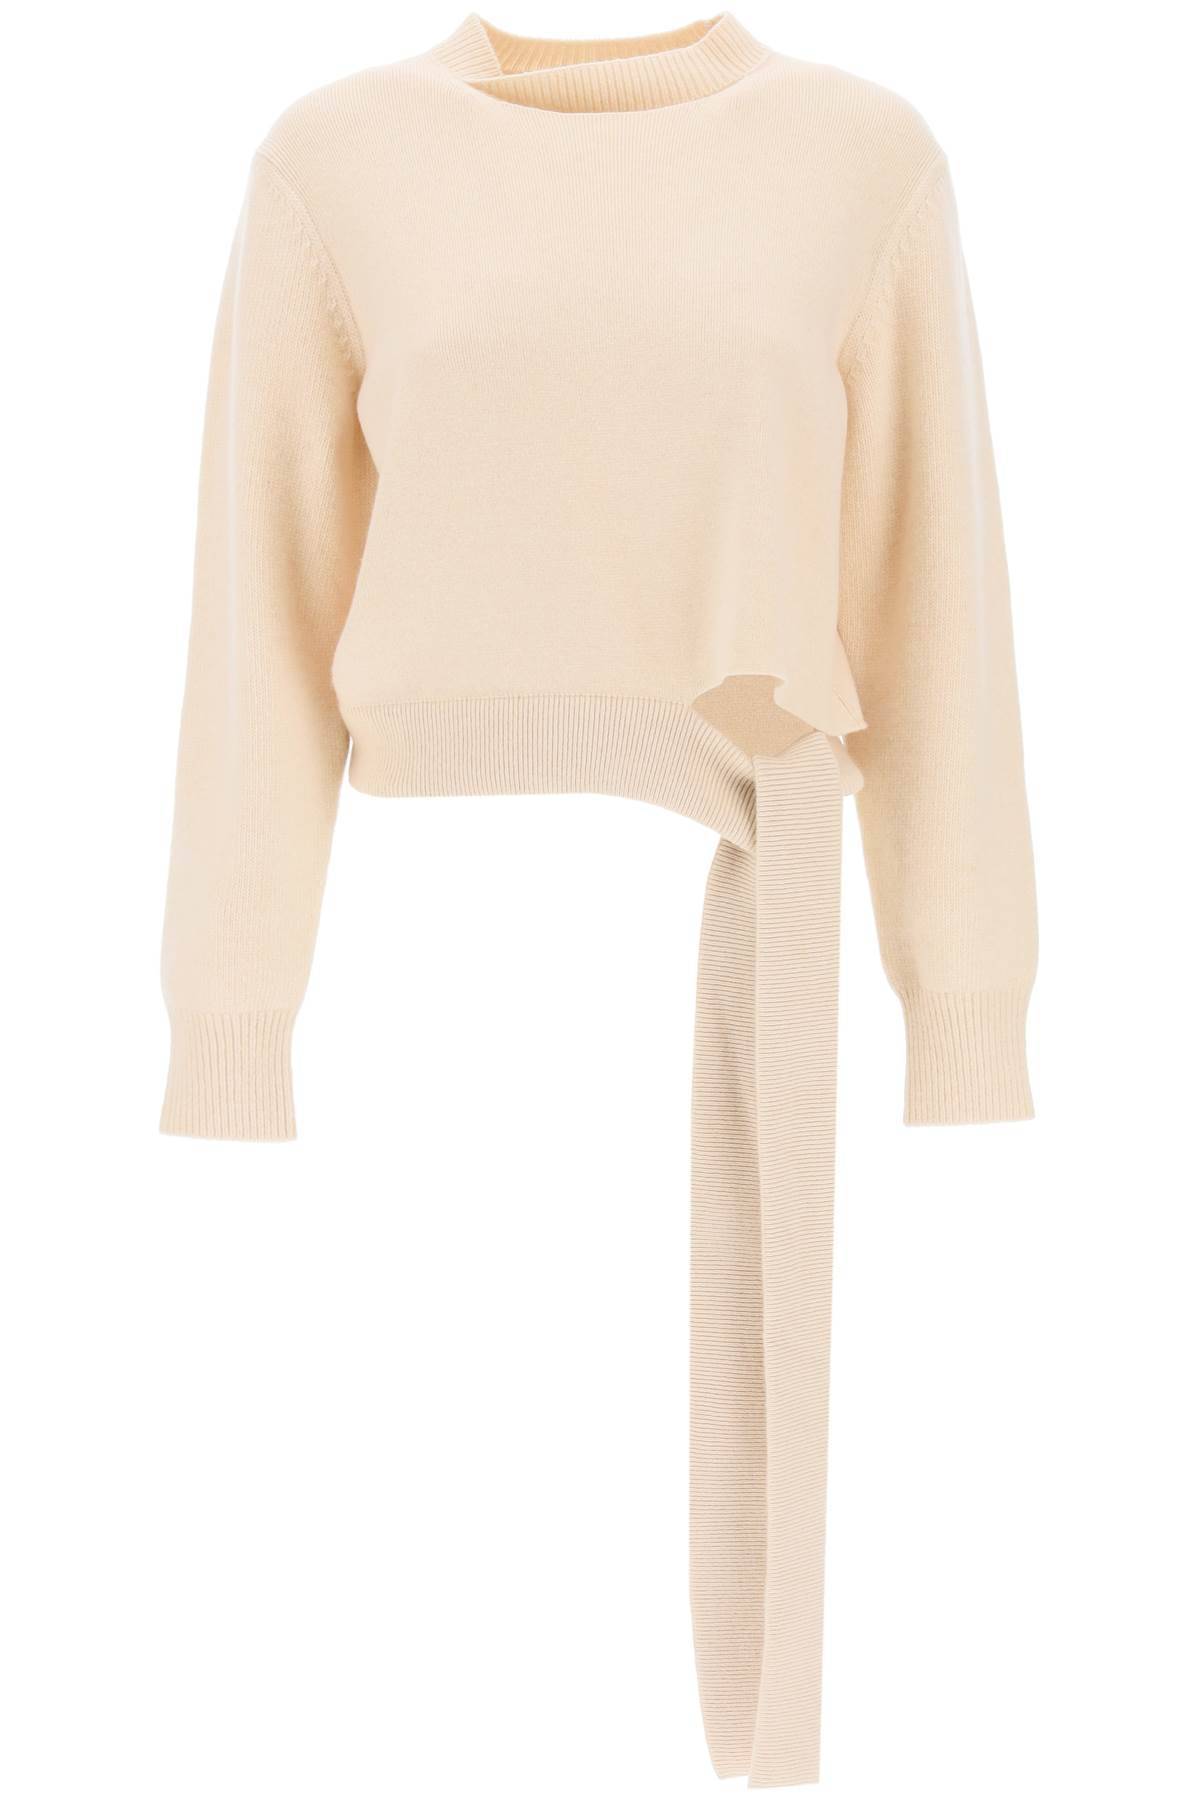 Fendi Wool And Cashmere Jumper With Sash In White